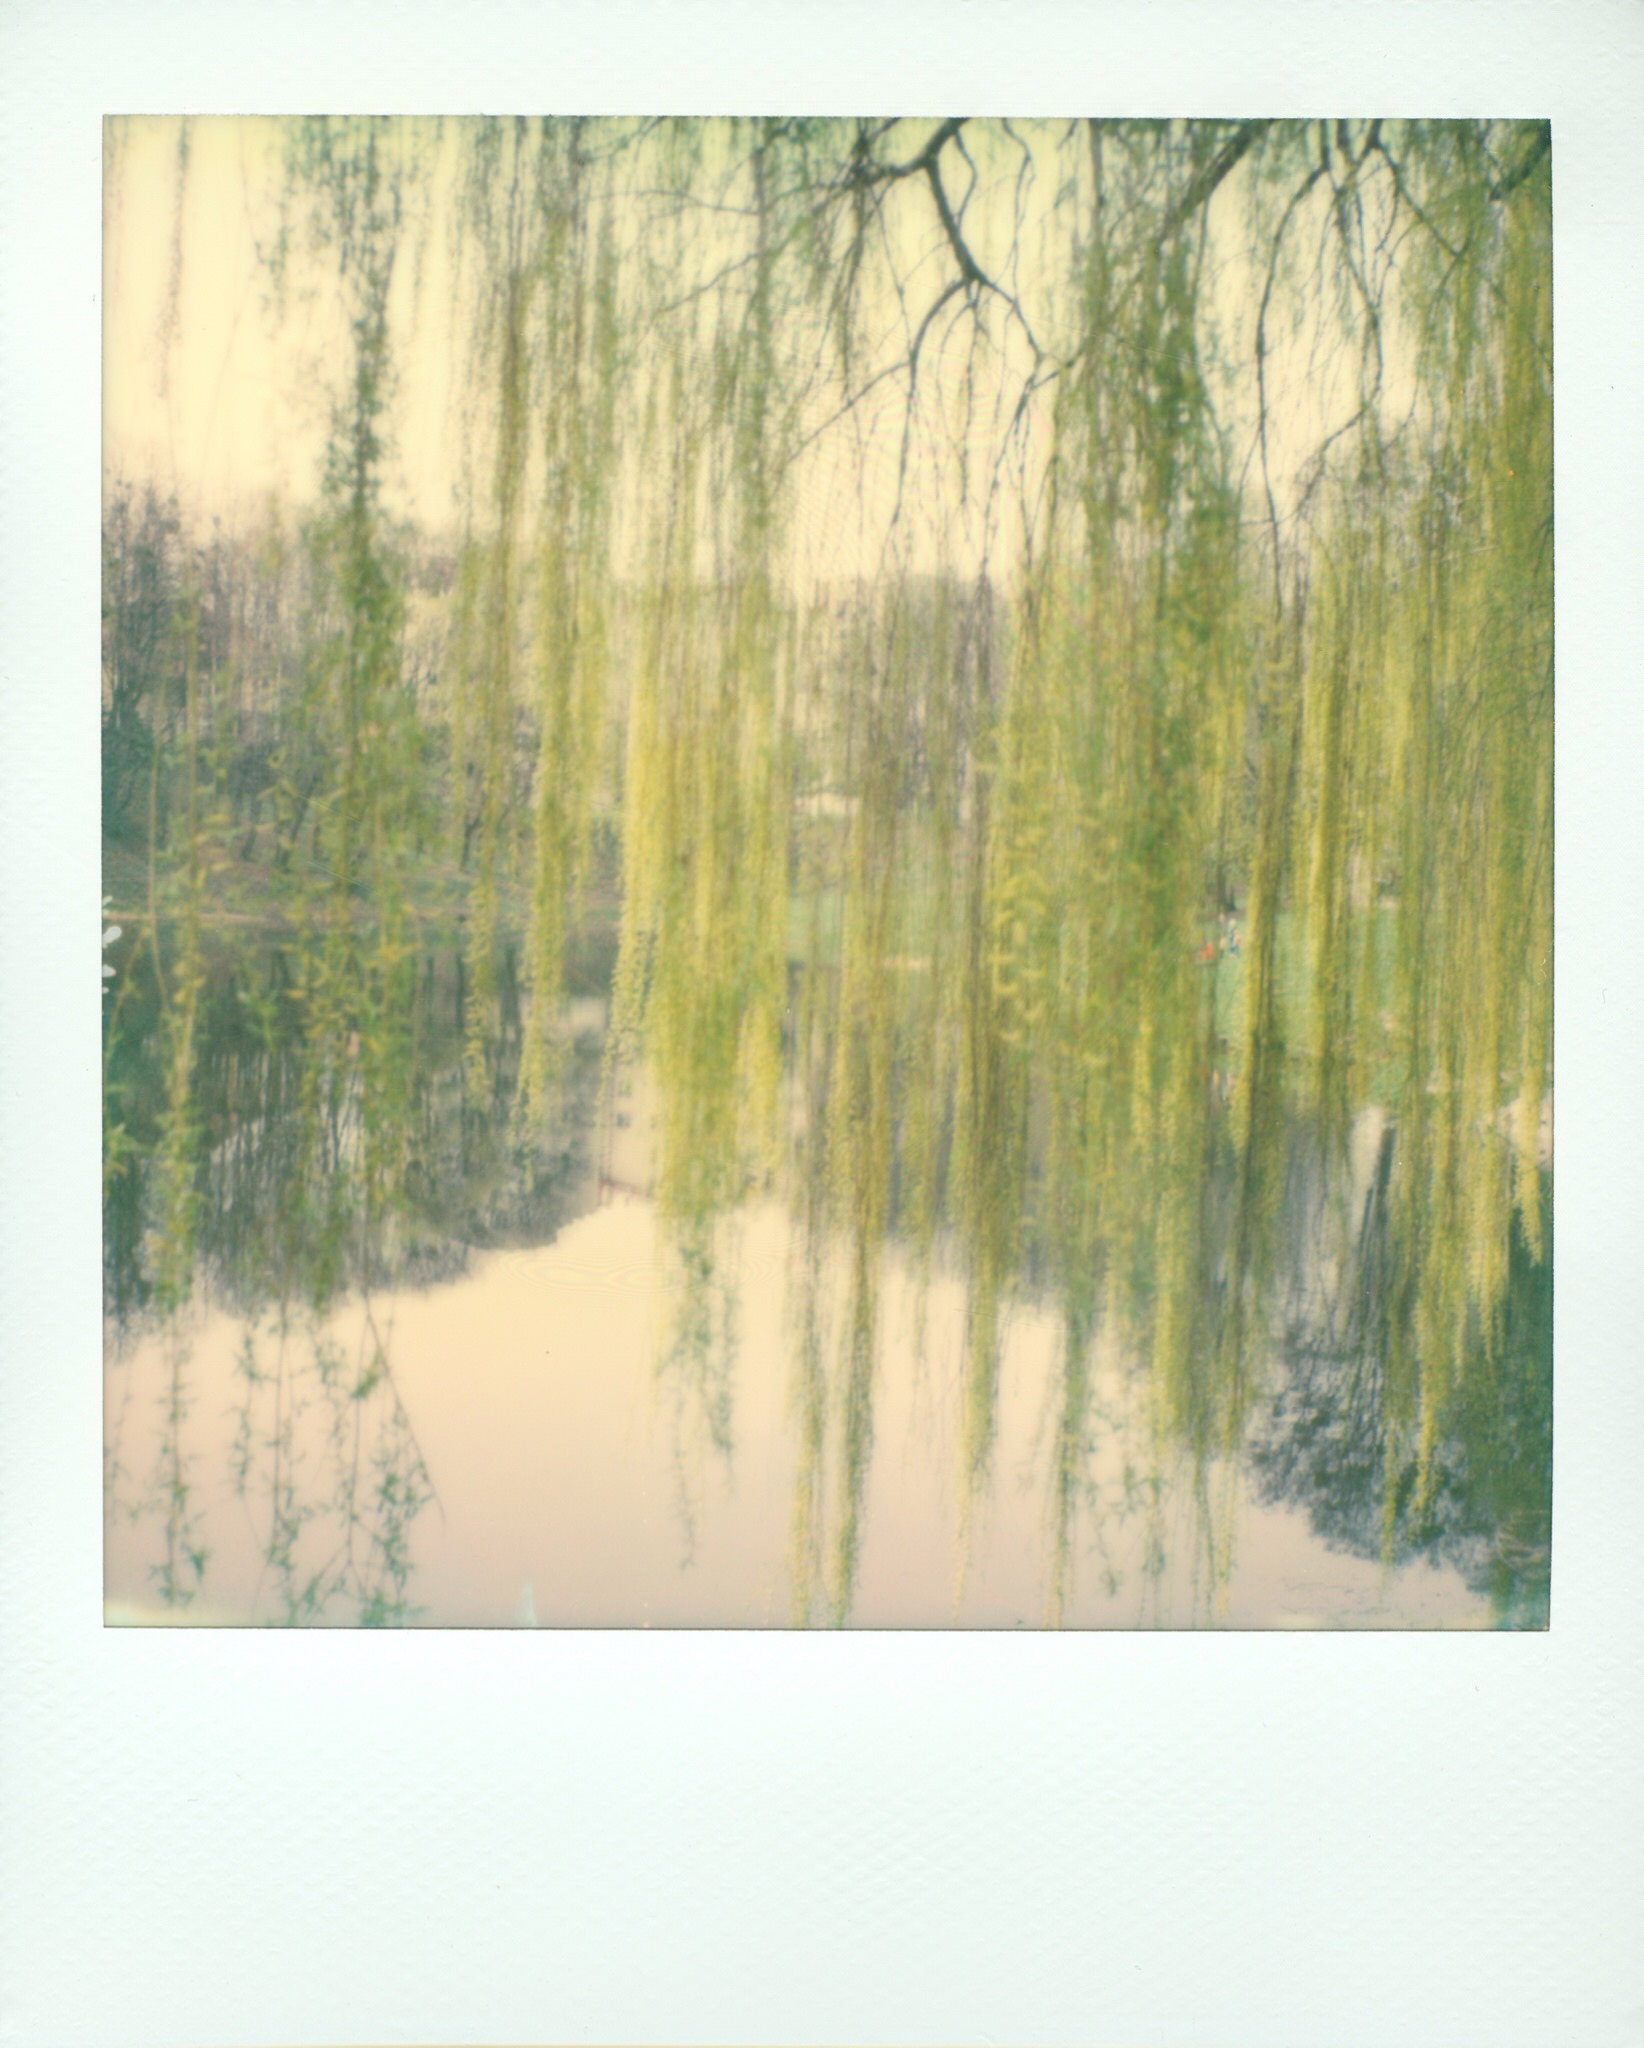 Weeping Willow | Polaroid SX70 | Impossible Project 70 Color | Noah Zyla